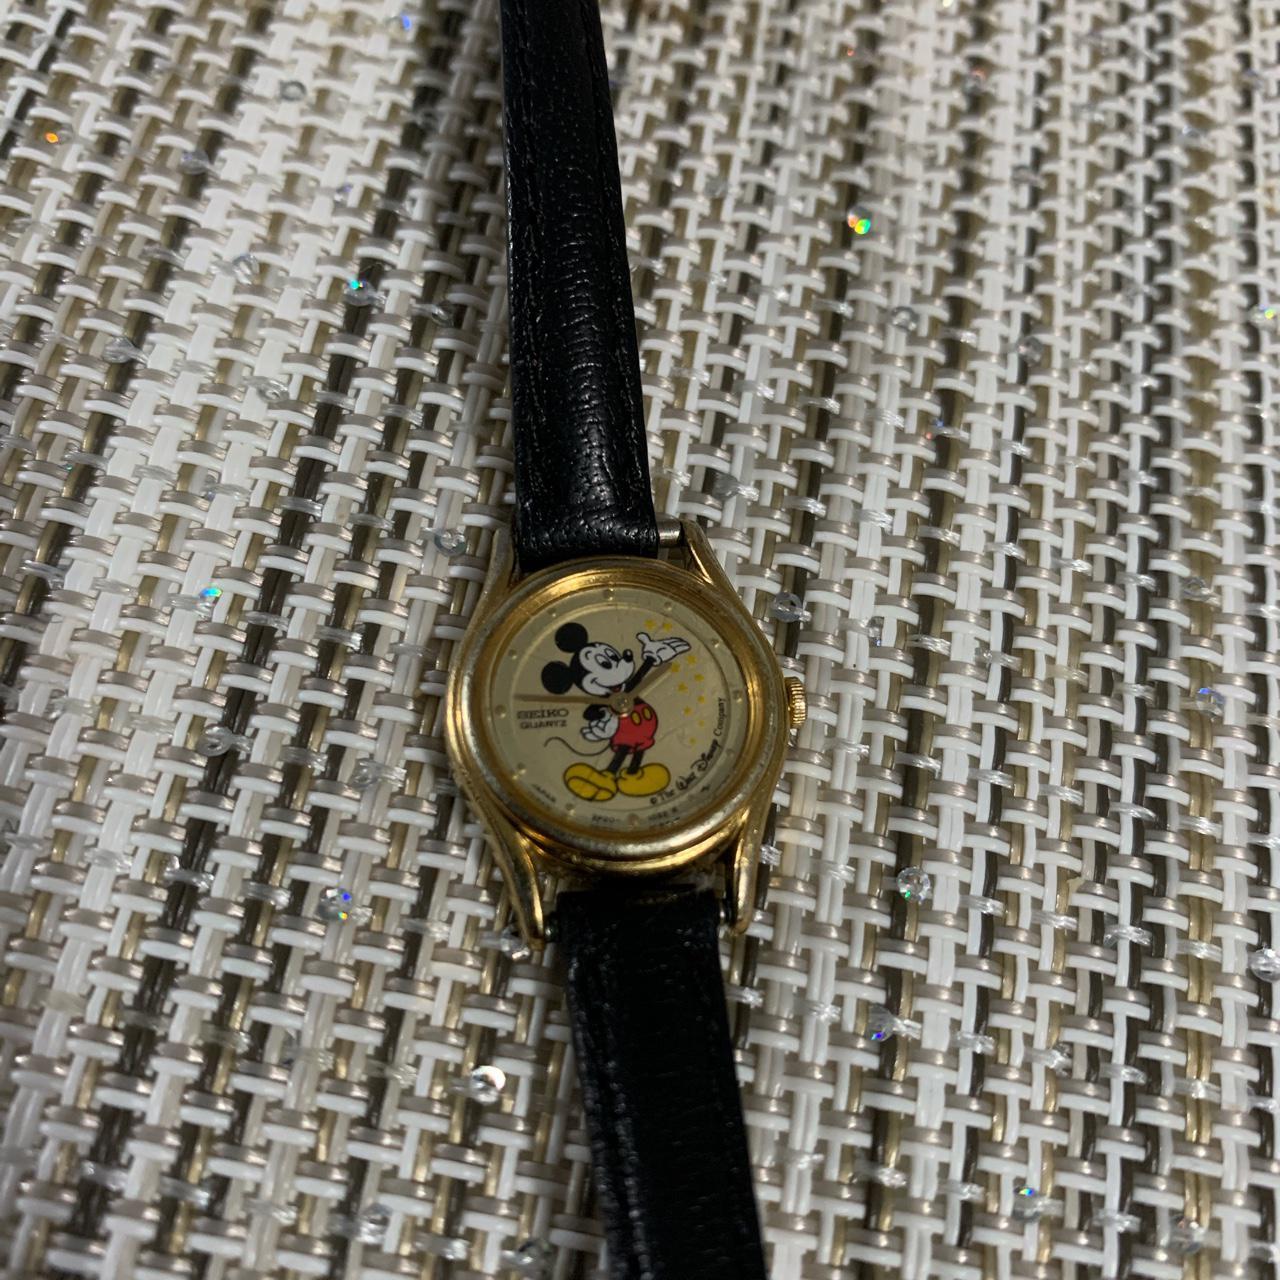 Product Image 4 - Vintage Seiko Mickey Mouse watch.

Good